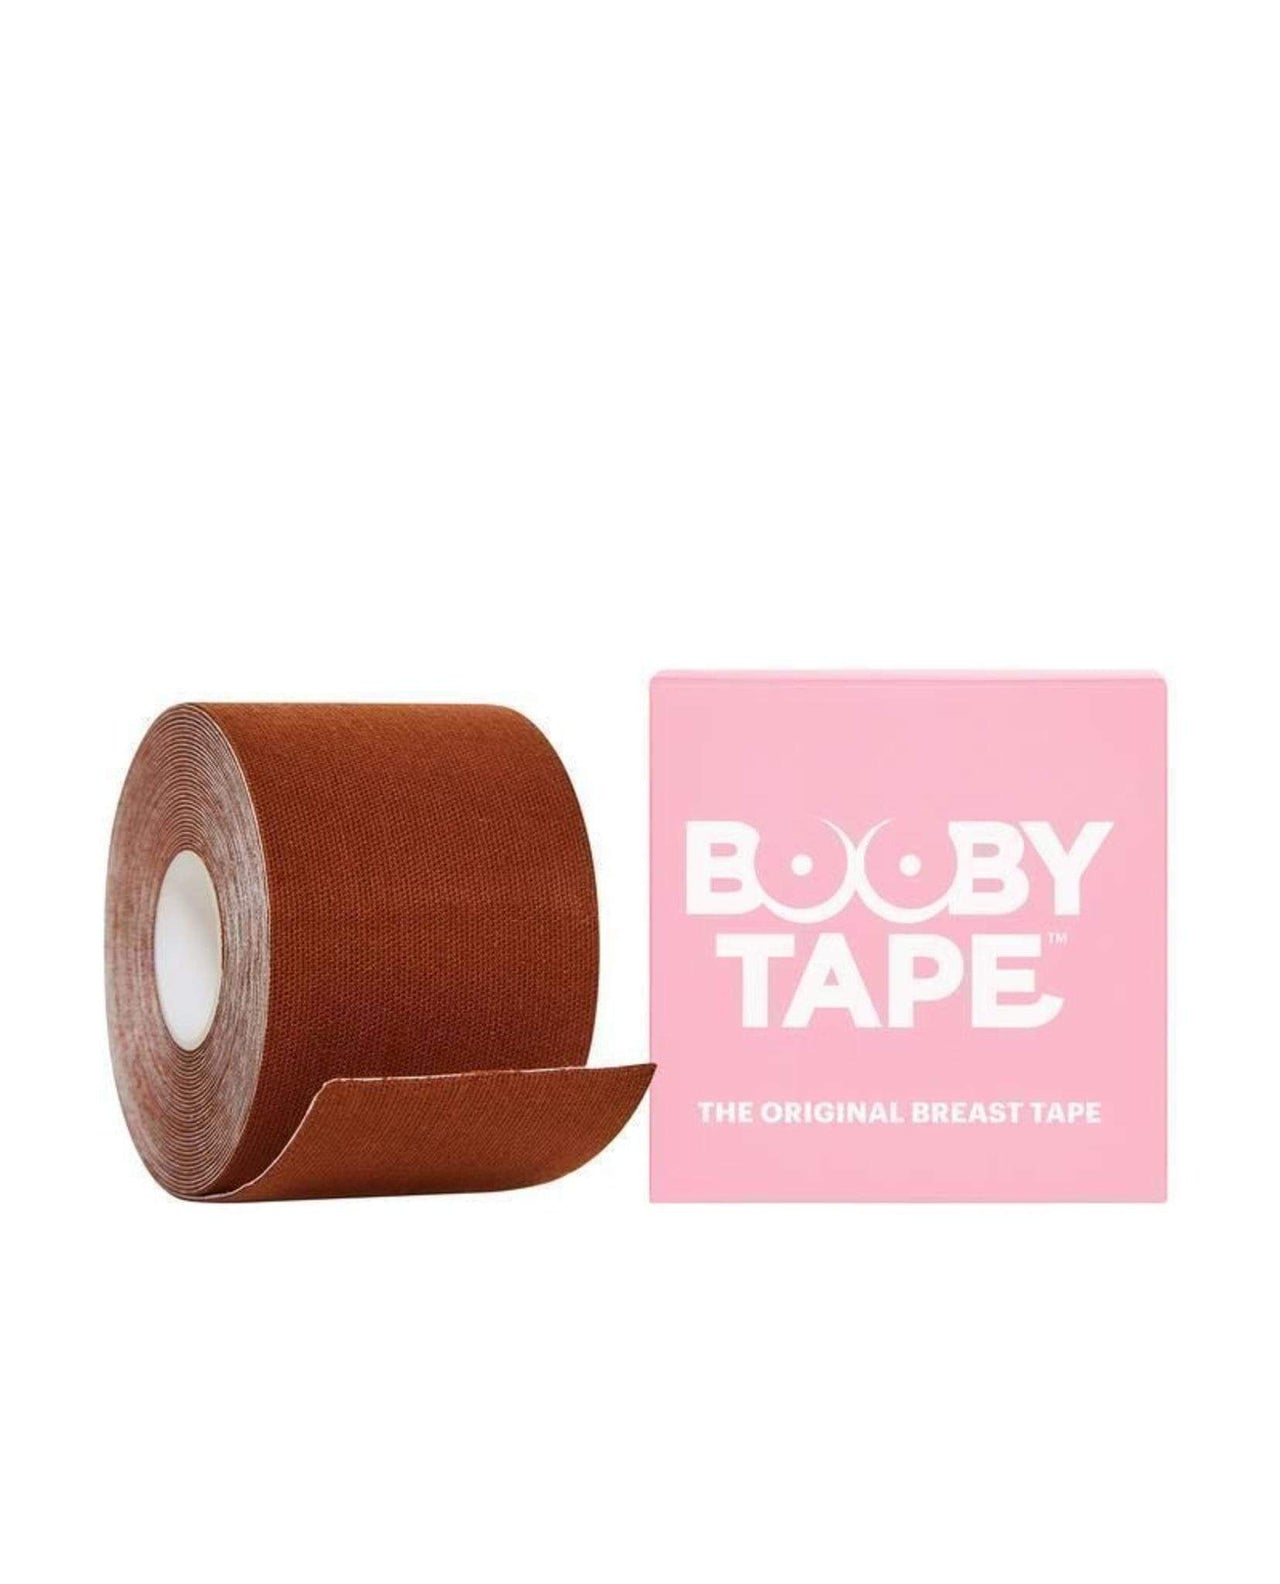 Booby Tape BrownDark Tan, Essentials Acc by Booby Tape | LIT Boutique